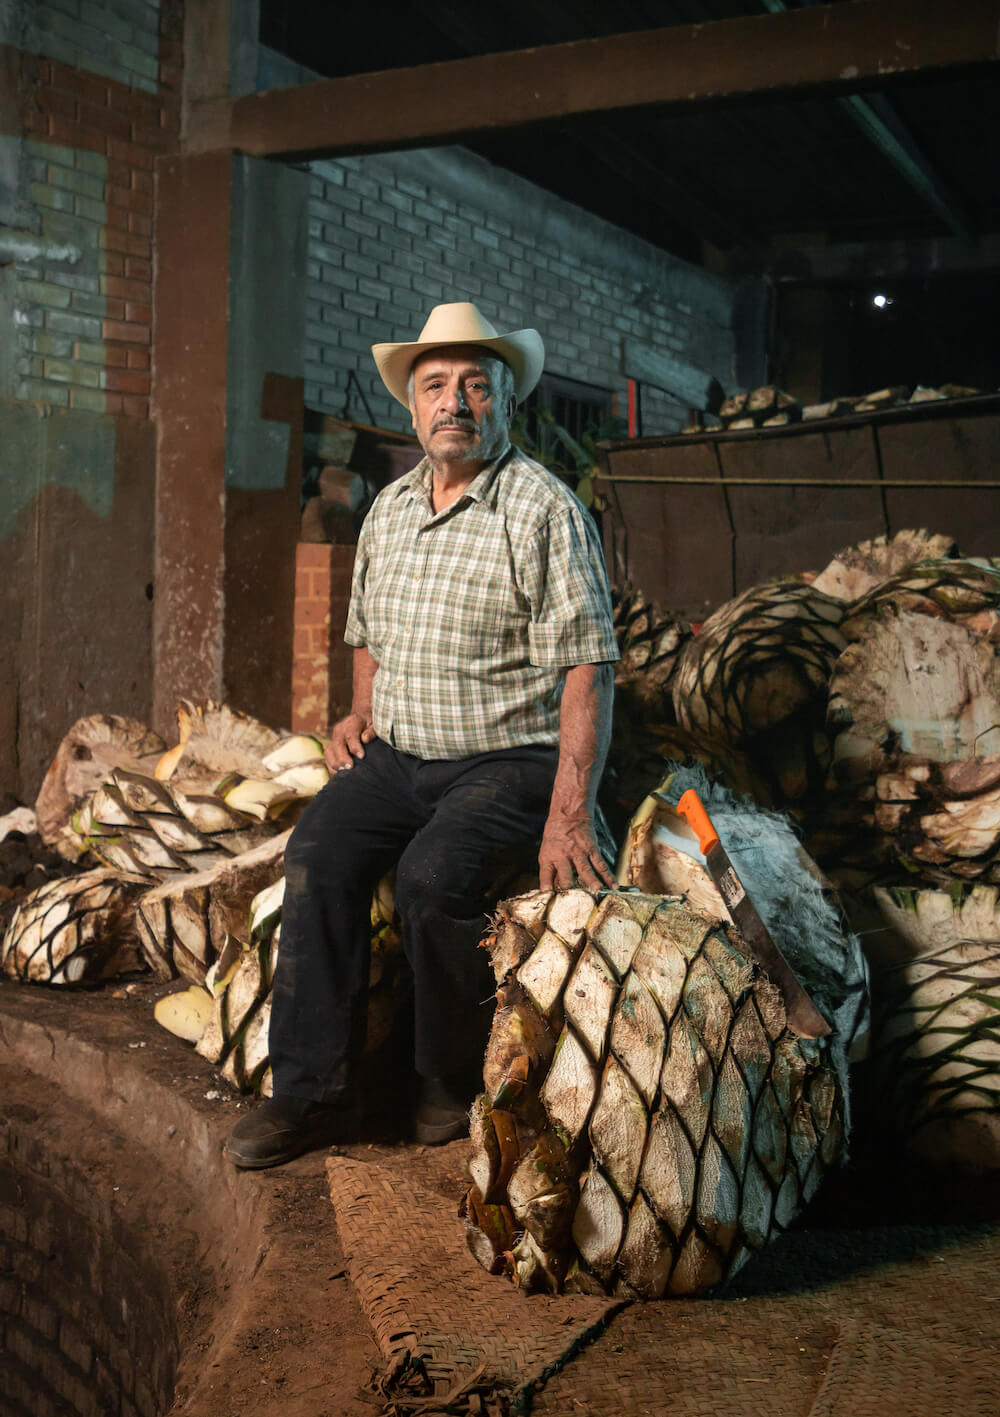 Don Miguel of Palomas Mensajeras sits on a pile of harvested agaves